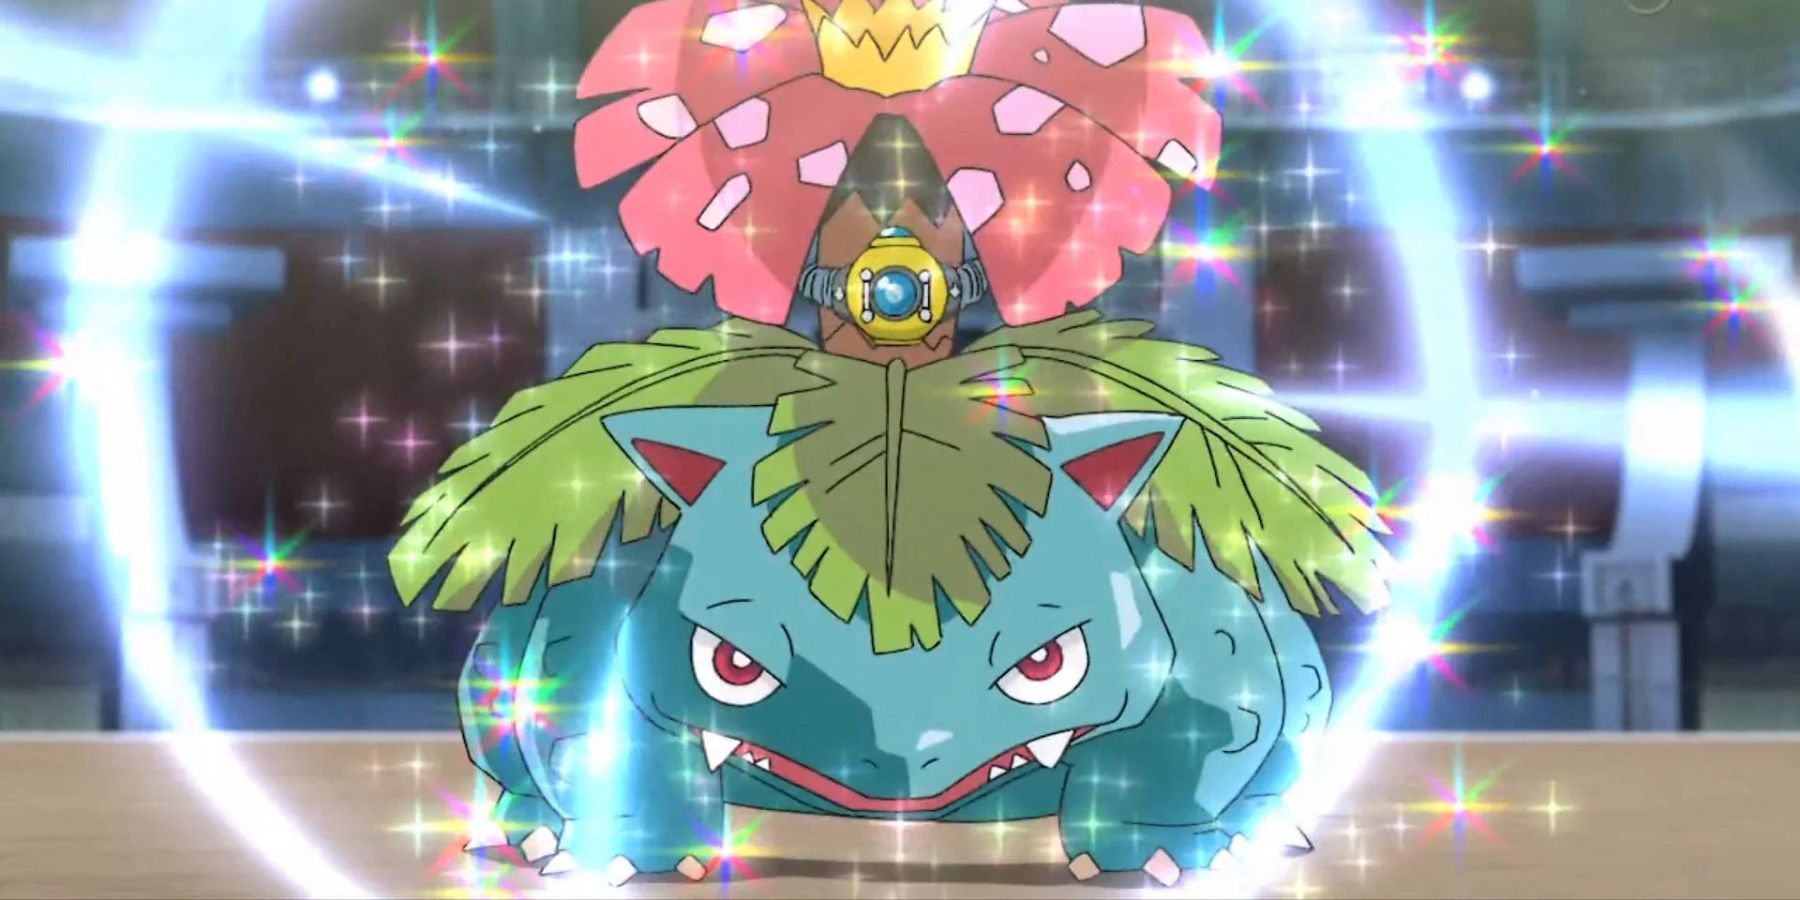 Venusaur charging an attack during battle in the Pokémon anime.